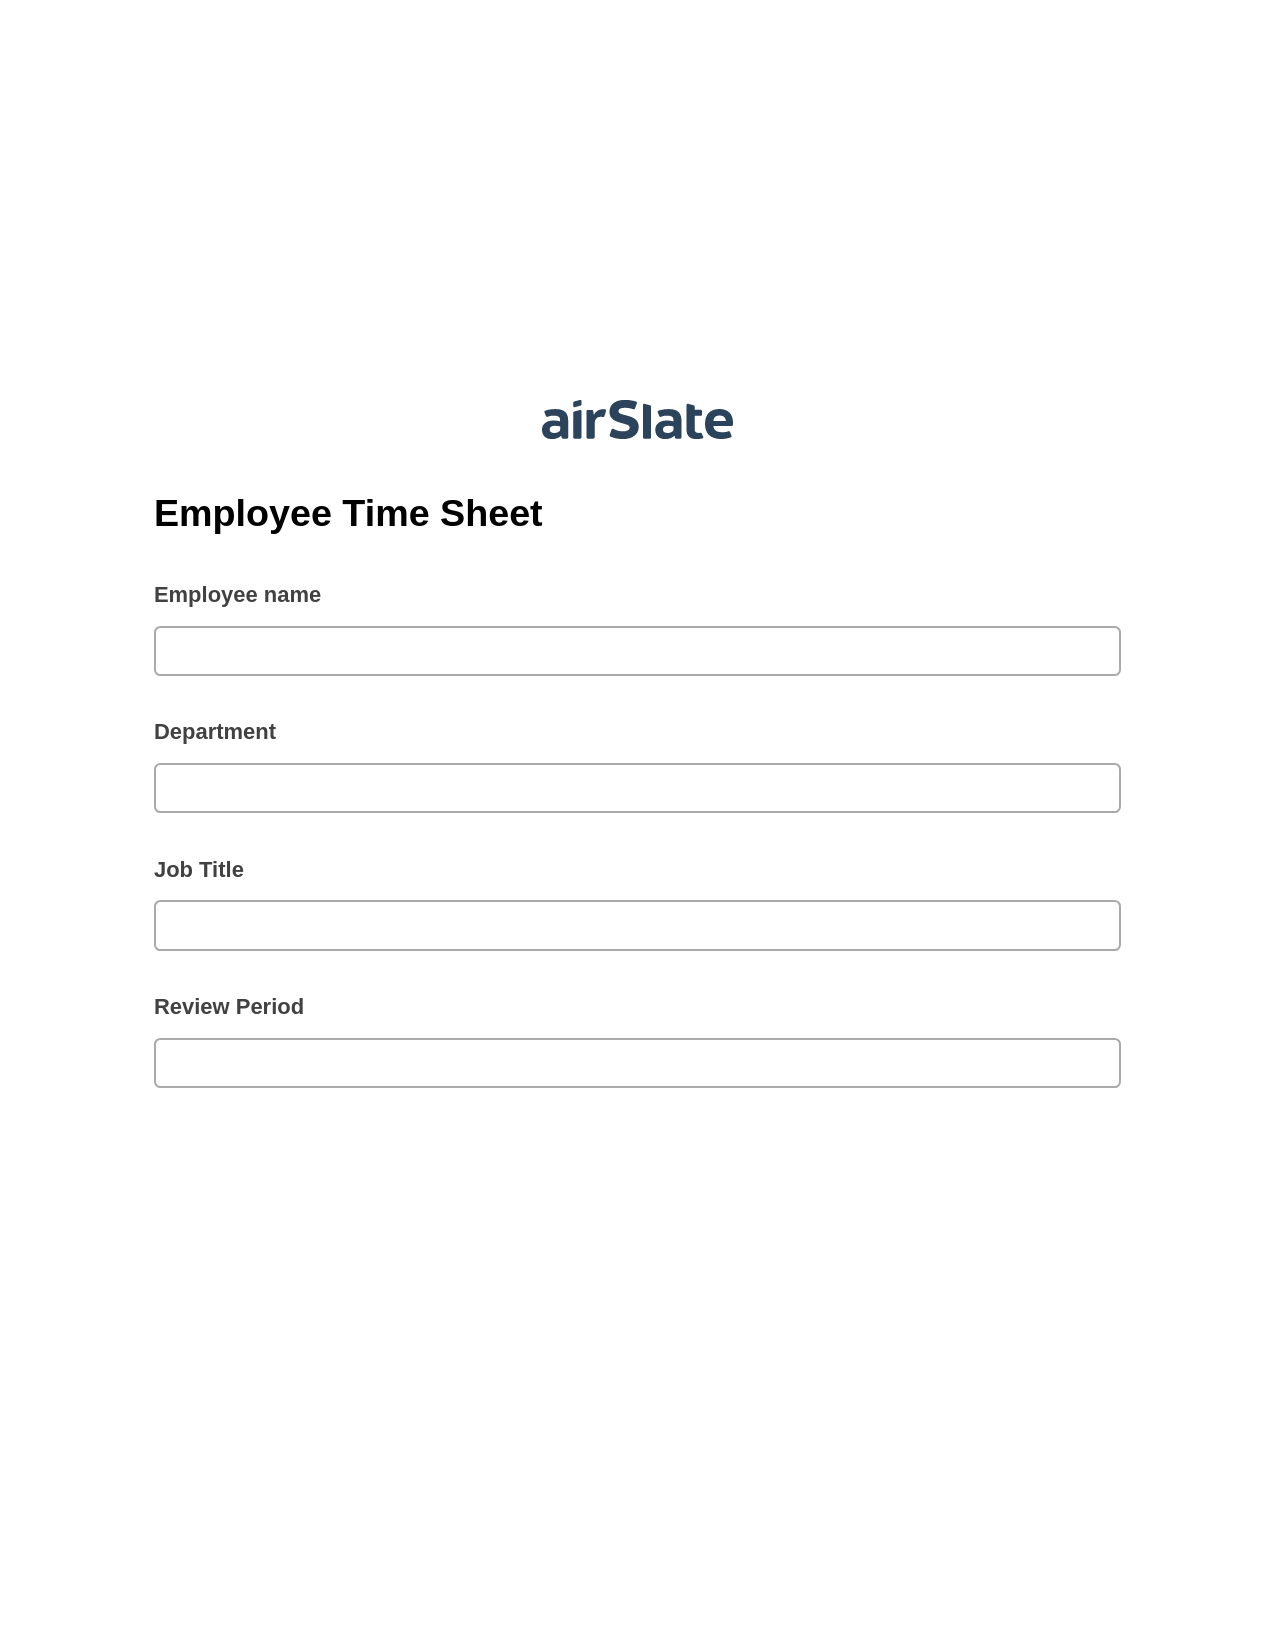 Multirole Employee Time Sheet Pre-fill from AirTable Bot, Create slate addon, Export to Excel 365 Bot